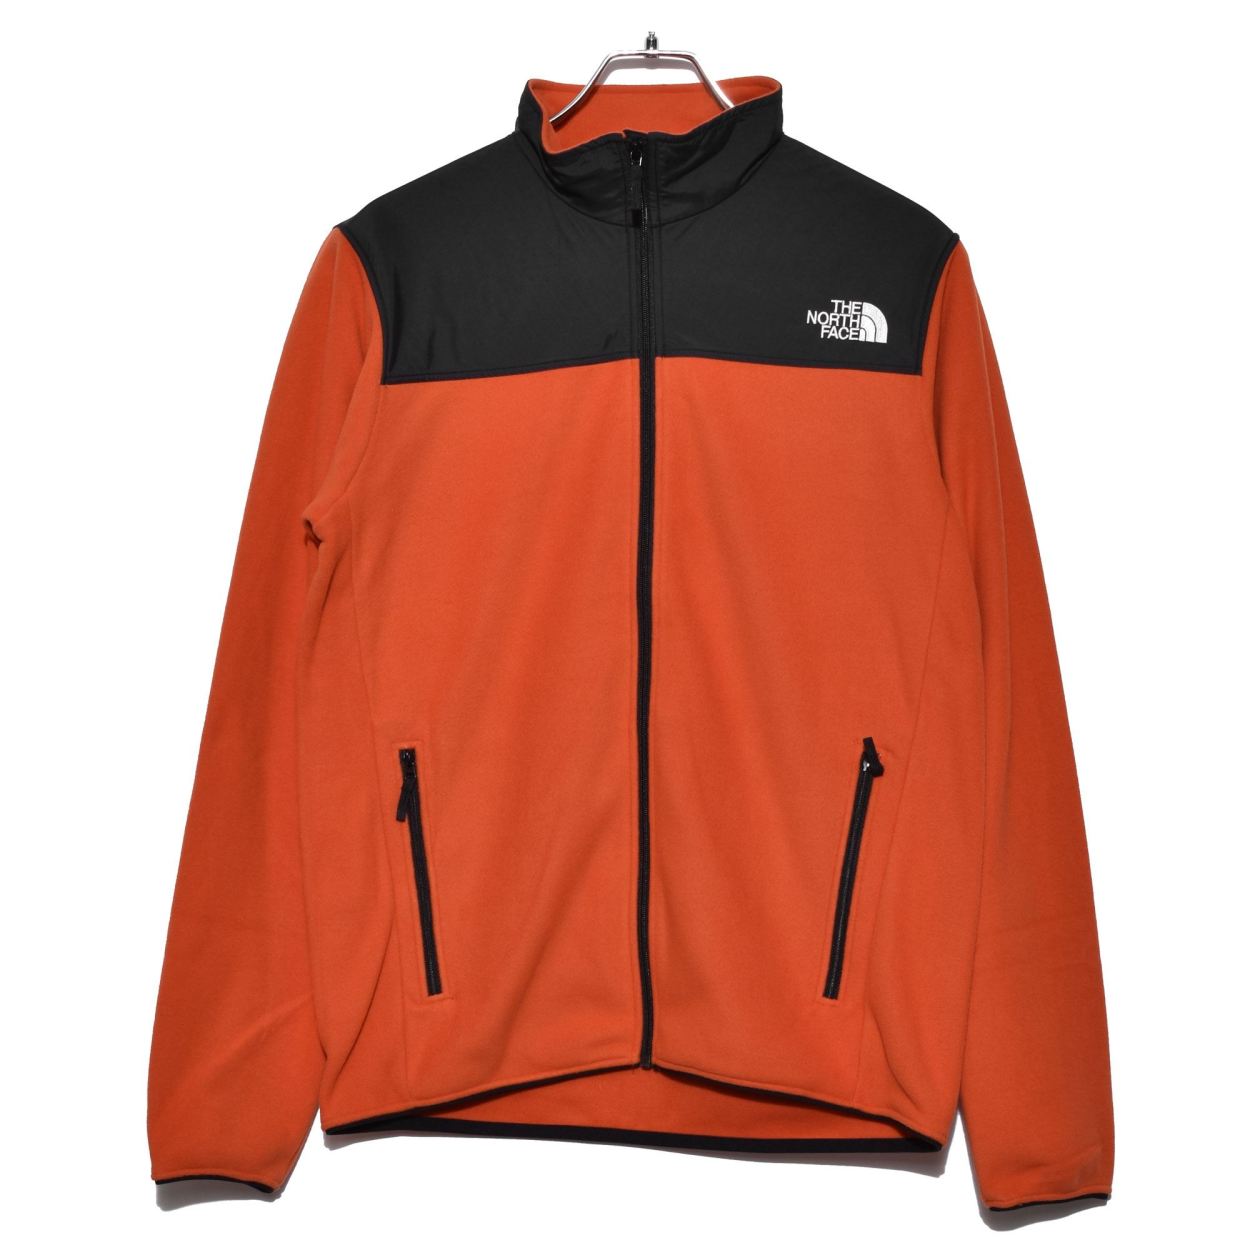 discount 77% Red M The North Face waterproof jacket MEN FASHION Jackets Sports 